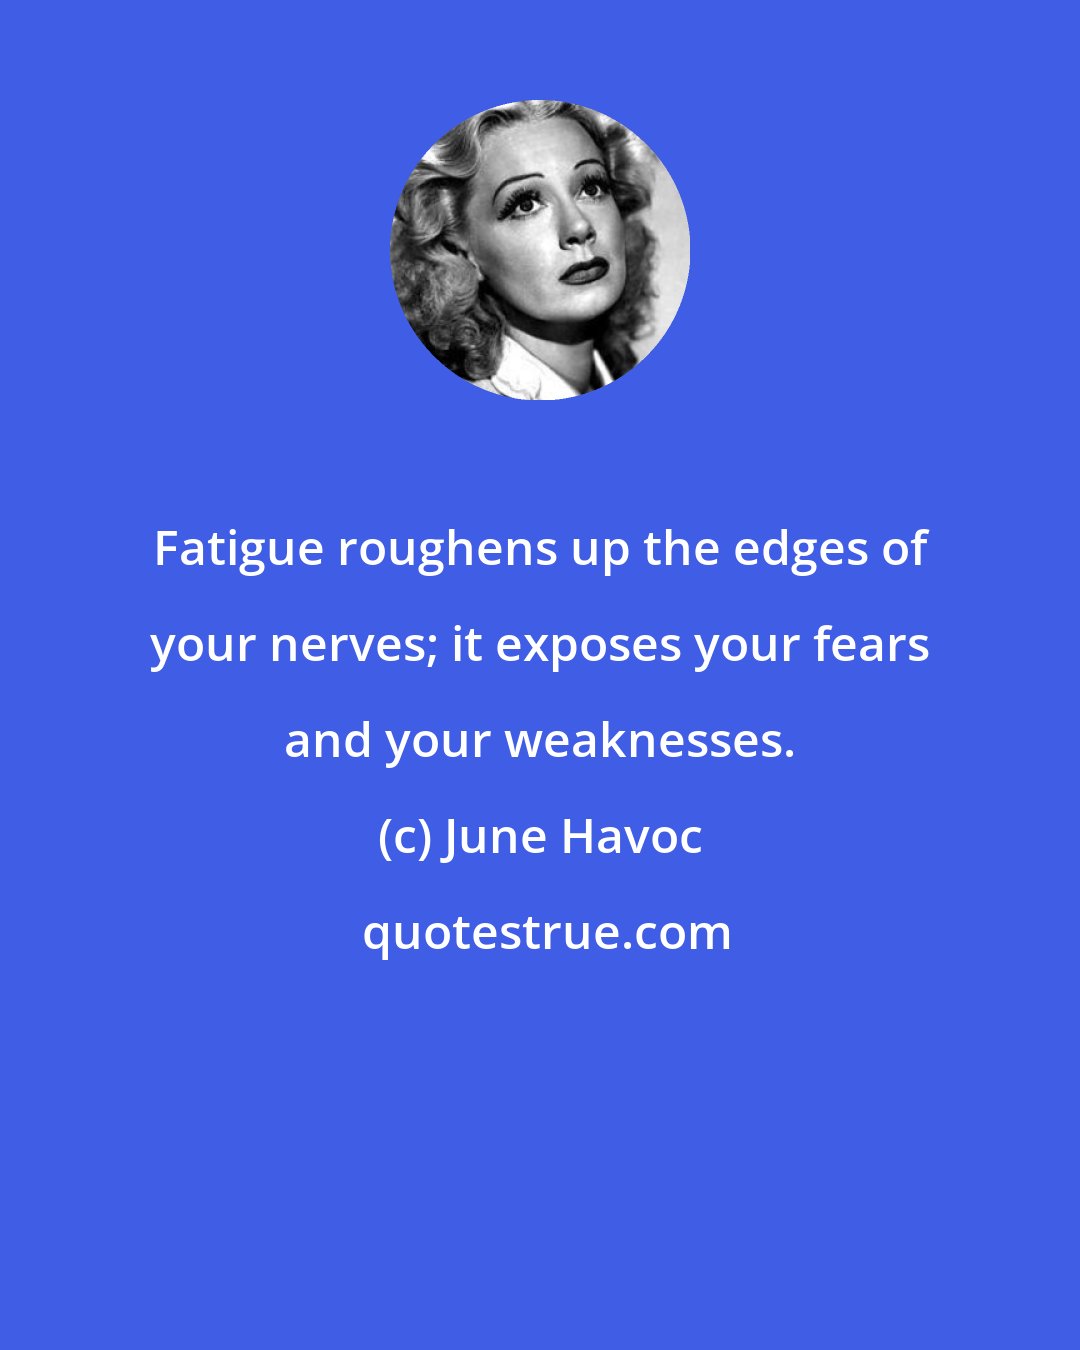 June Havoc: Fatigue roughens up the edges of your nerves; it exposes your fears and your weaknesses.